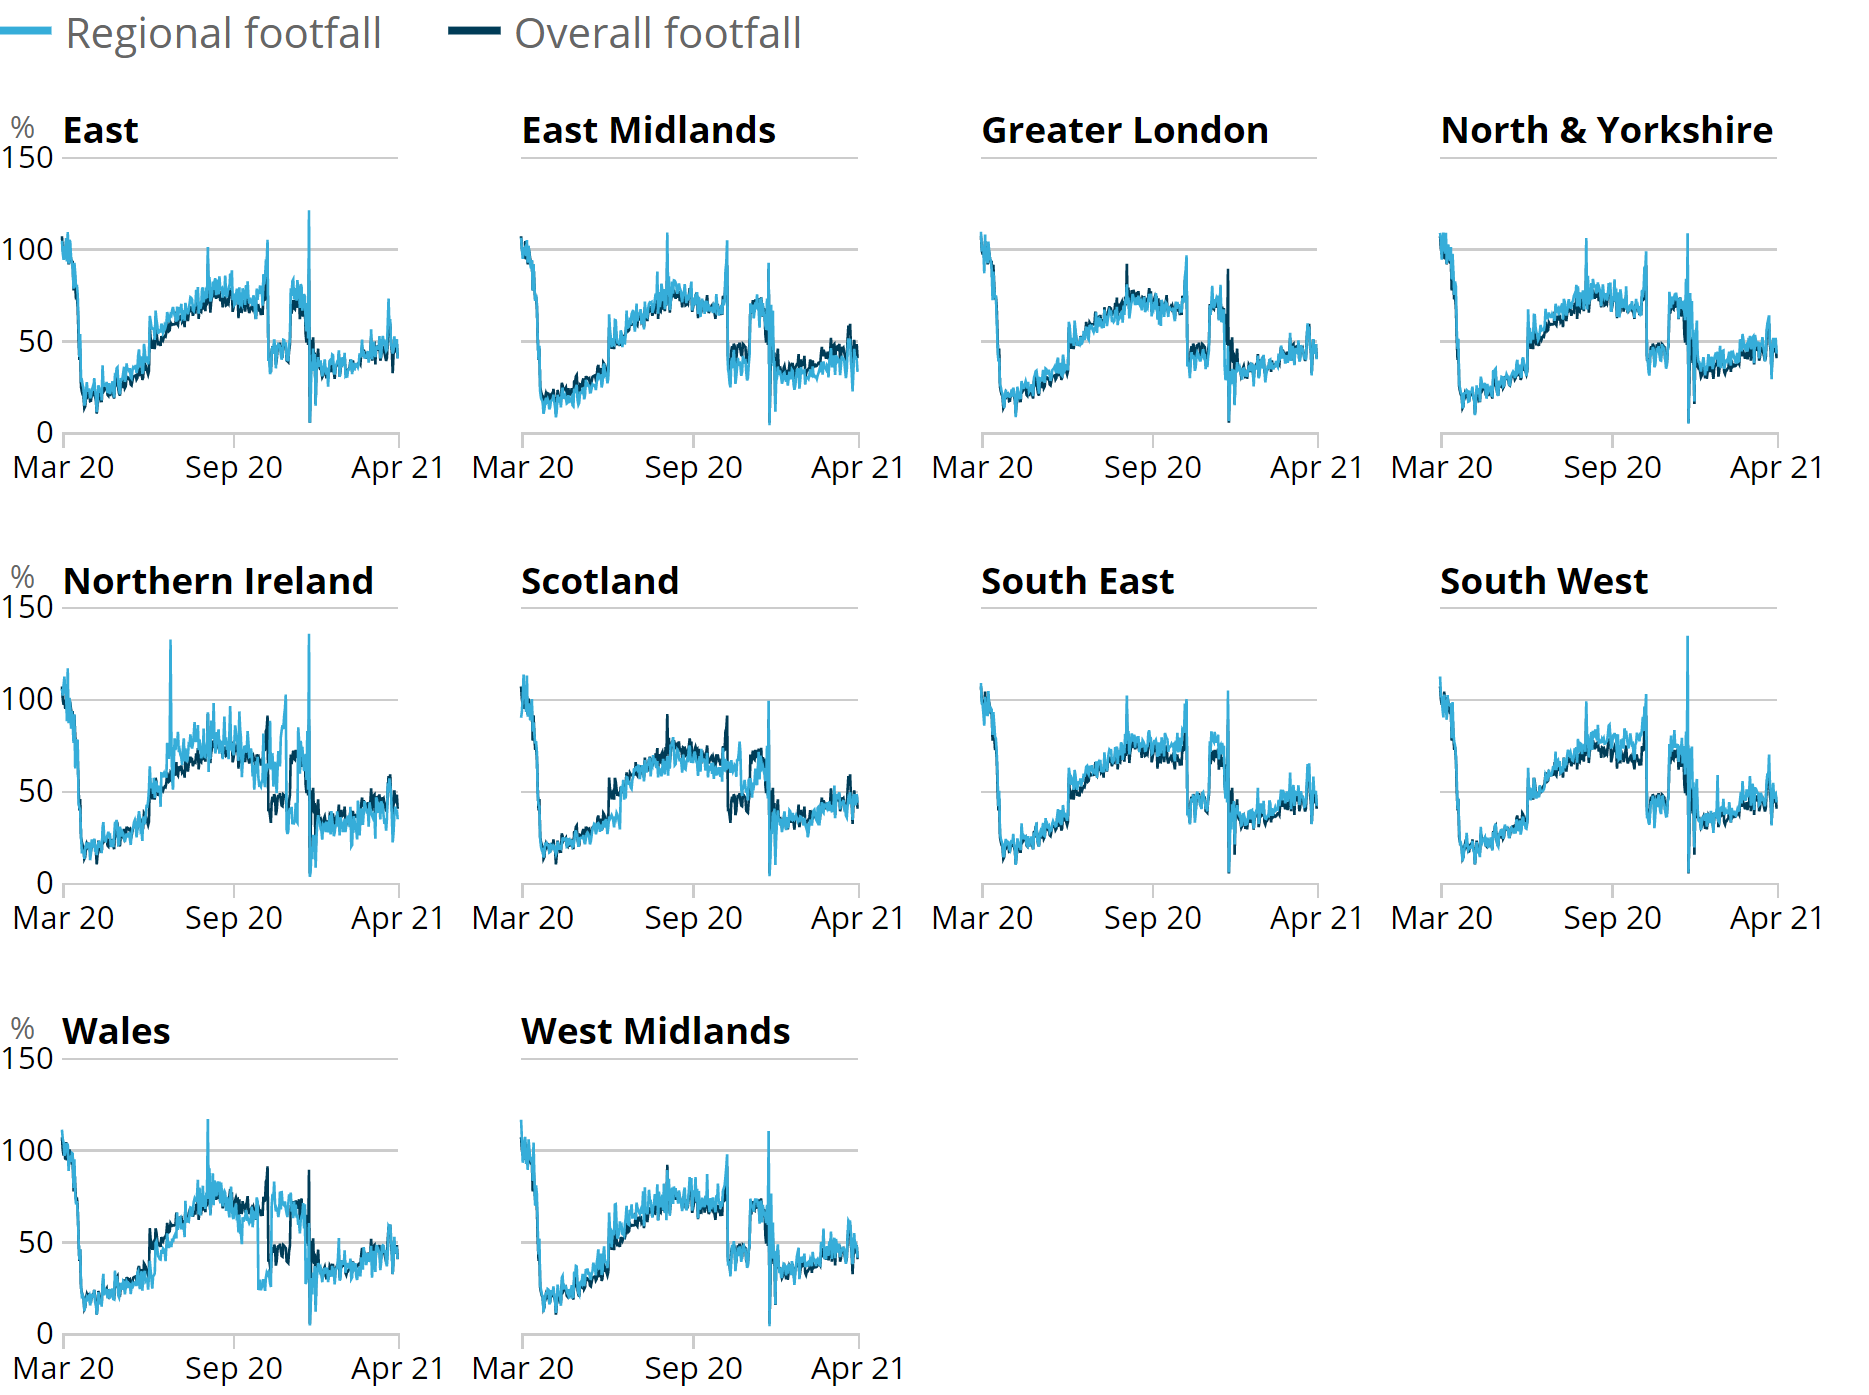 Line chart showing in the week to 10 April 2021, retail footfall was strongest in the West Midlands and the East of England at 46% of their level in the equivalent week of 2019.